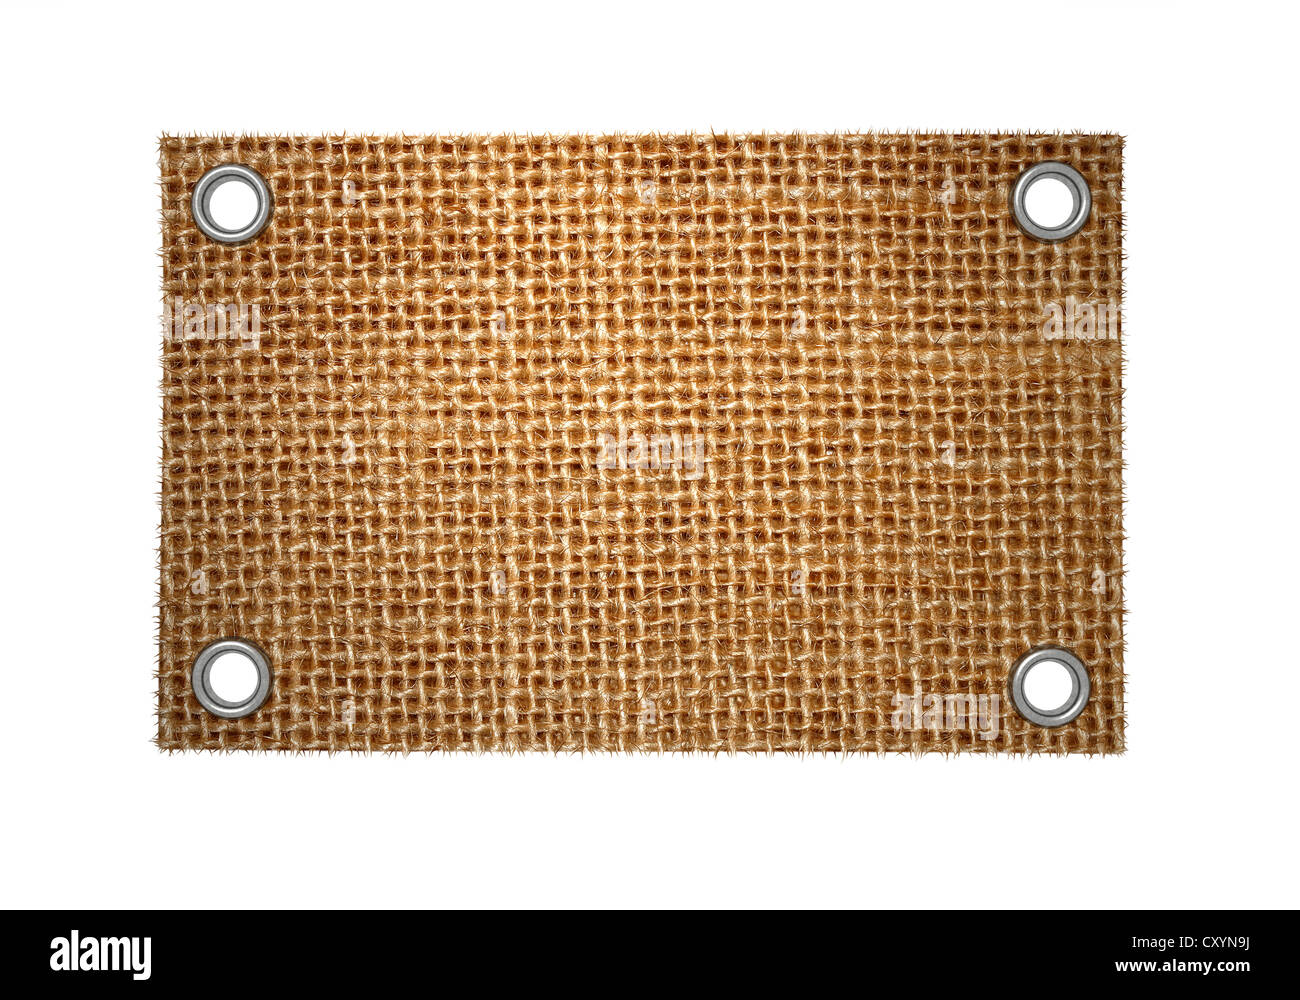 Empty grunge label of burlap with rivets Stock Photo